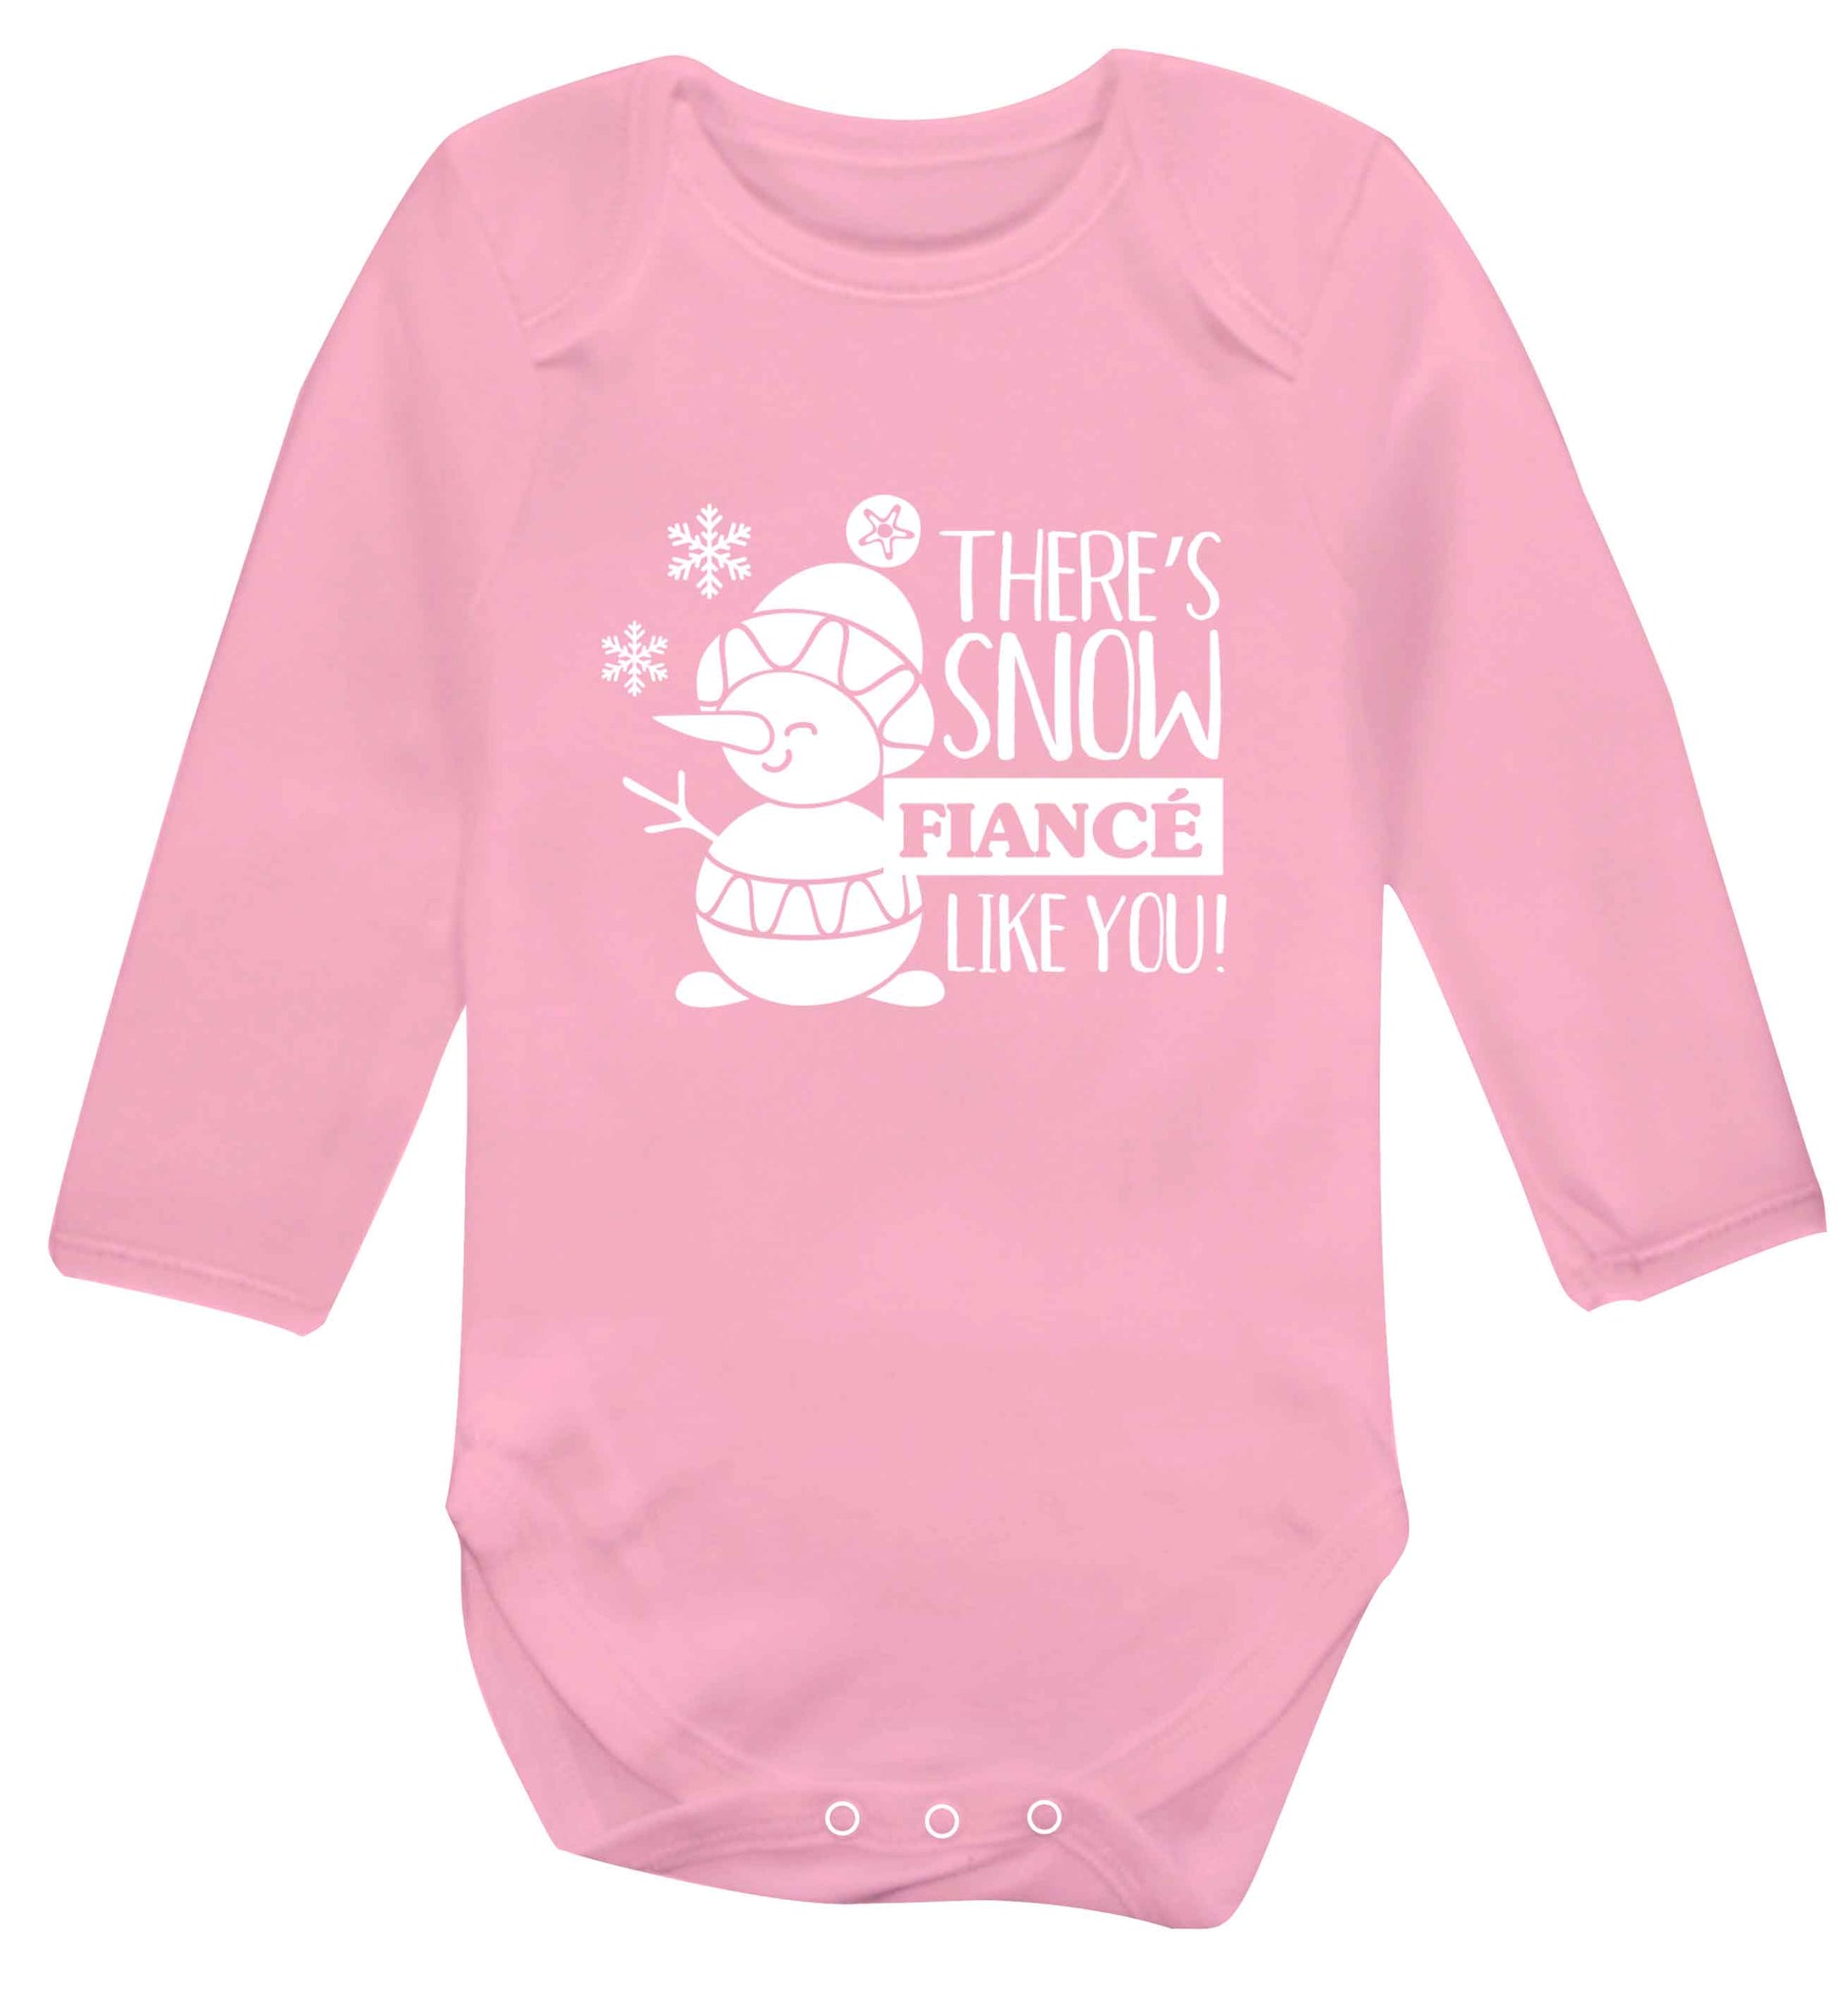 There's snow fiance like you baby vest long sleeved pale pink 6-12 months